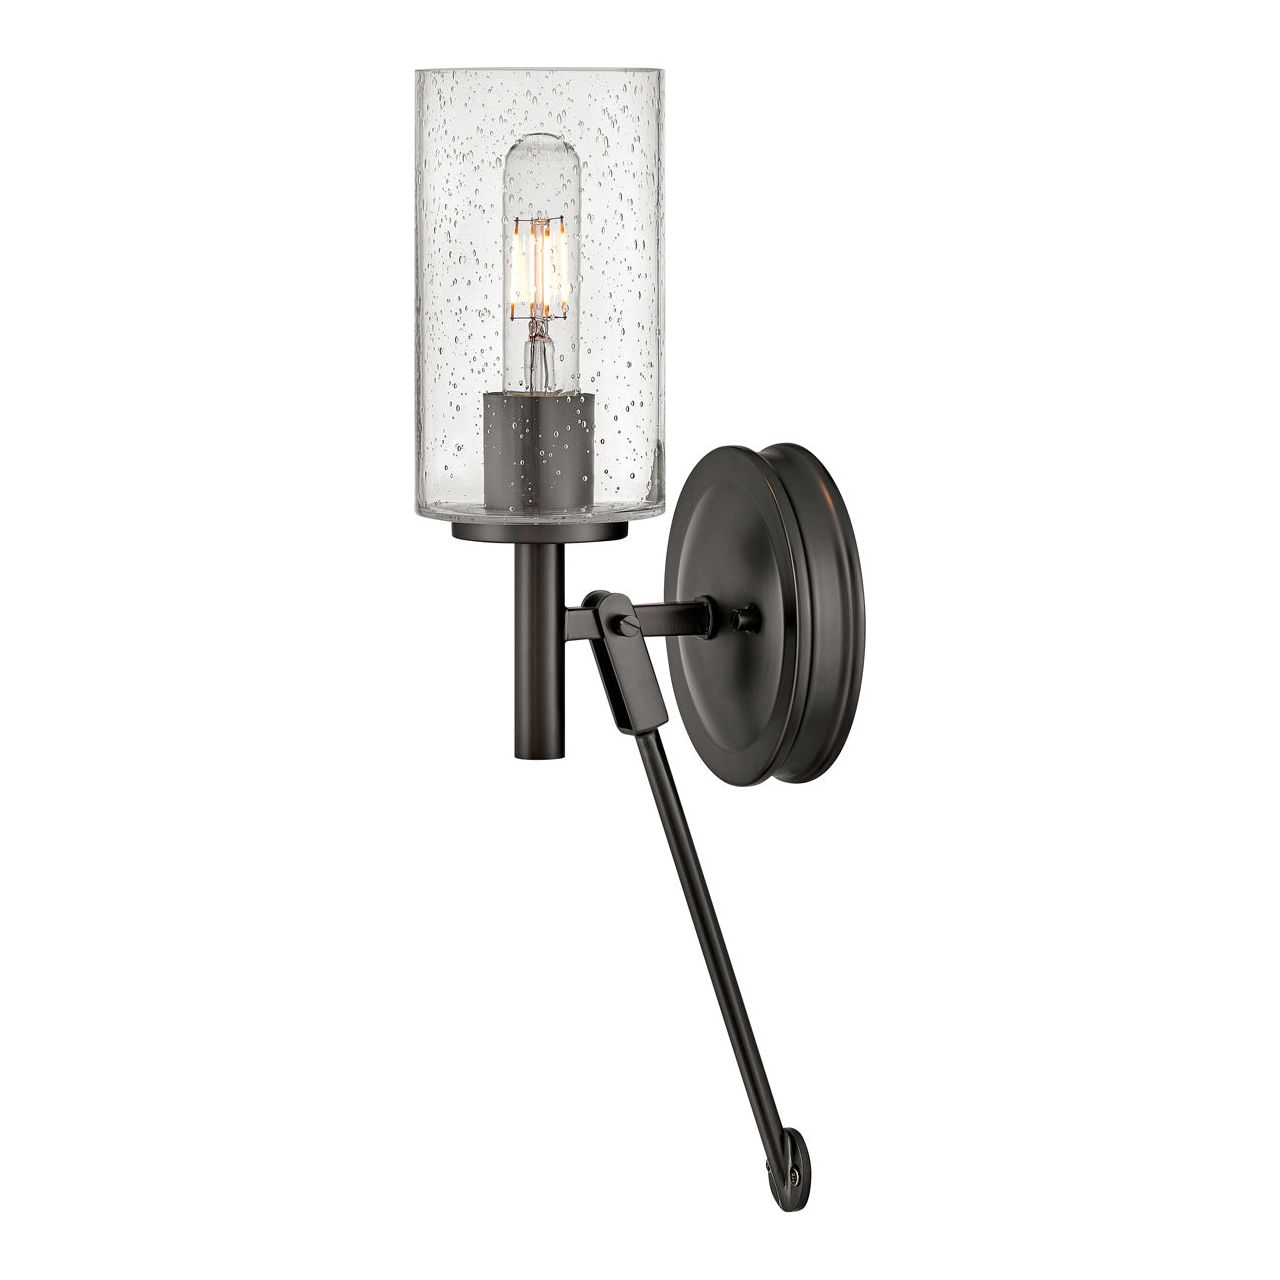 Hinkley Canada - 3380BX - LED Wall Sconce - Collier - Black Oxide